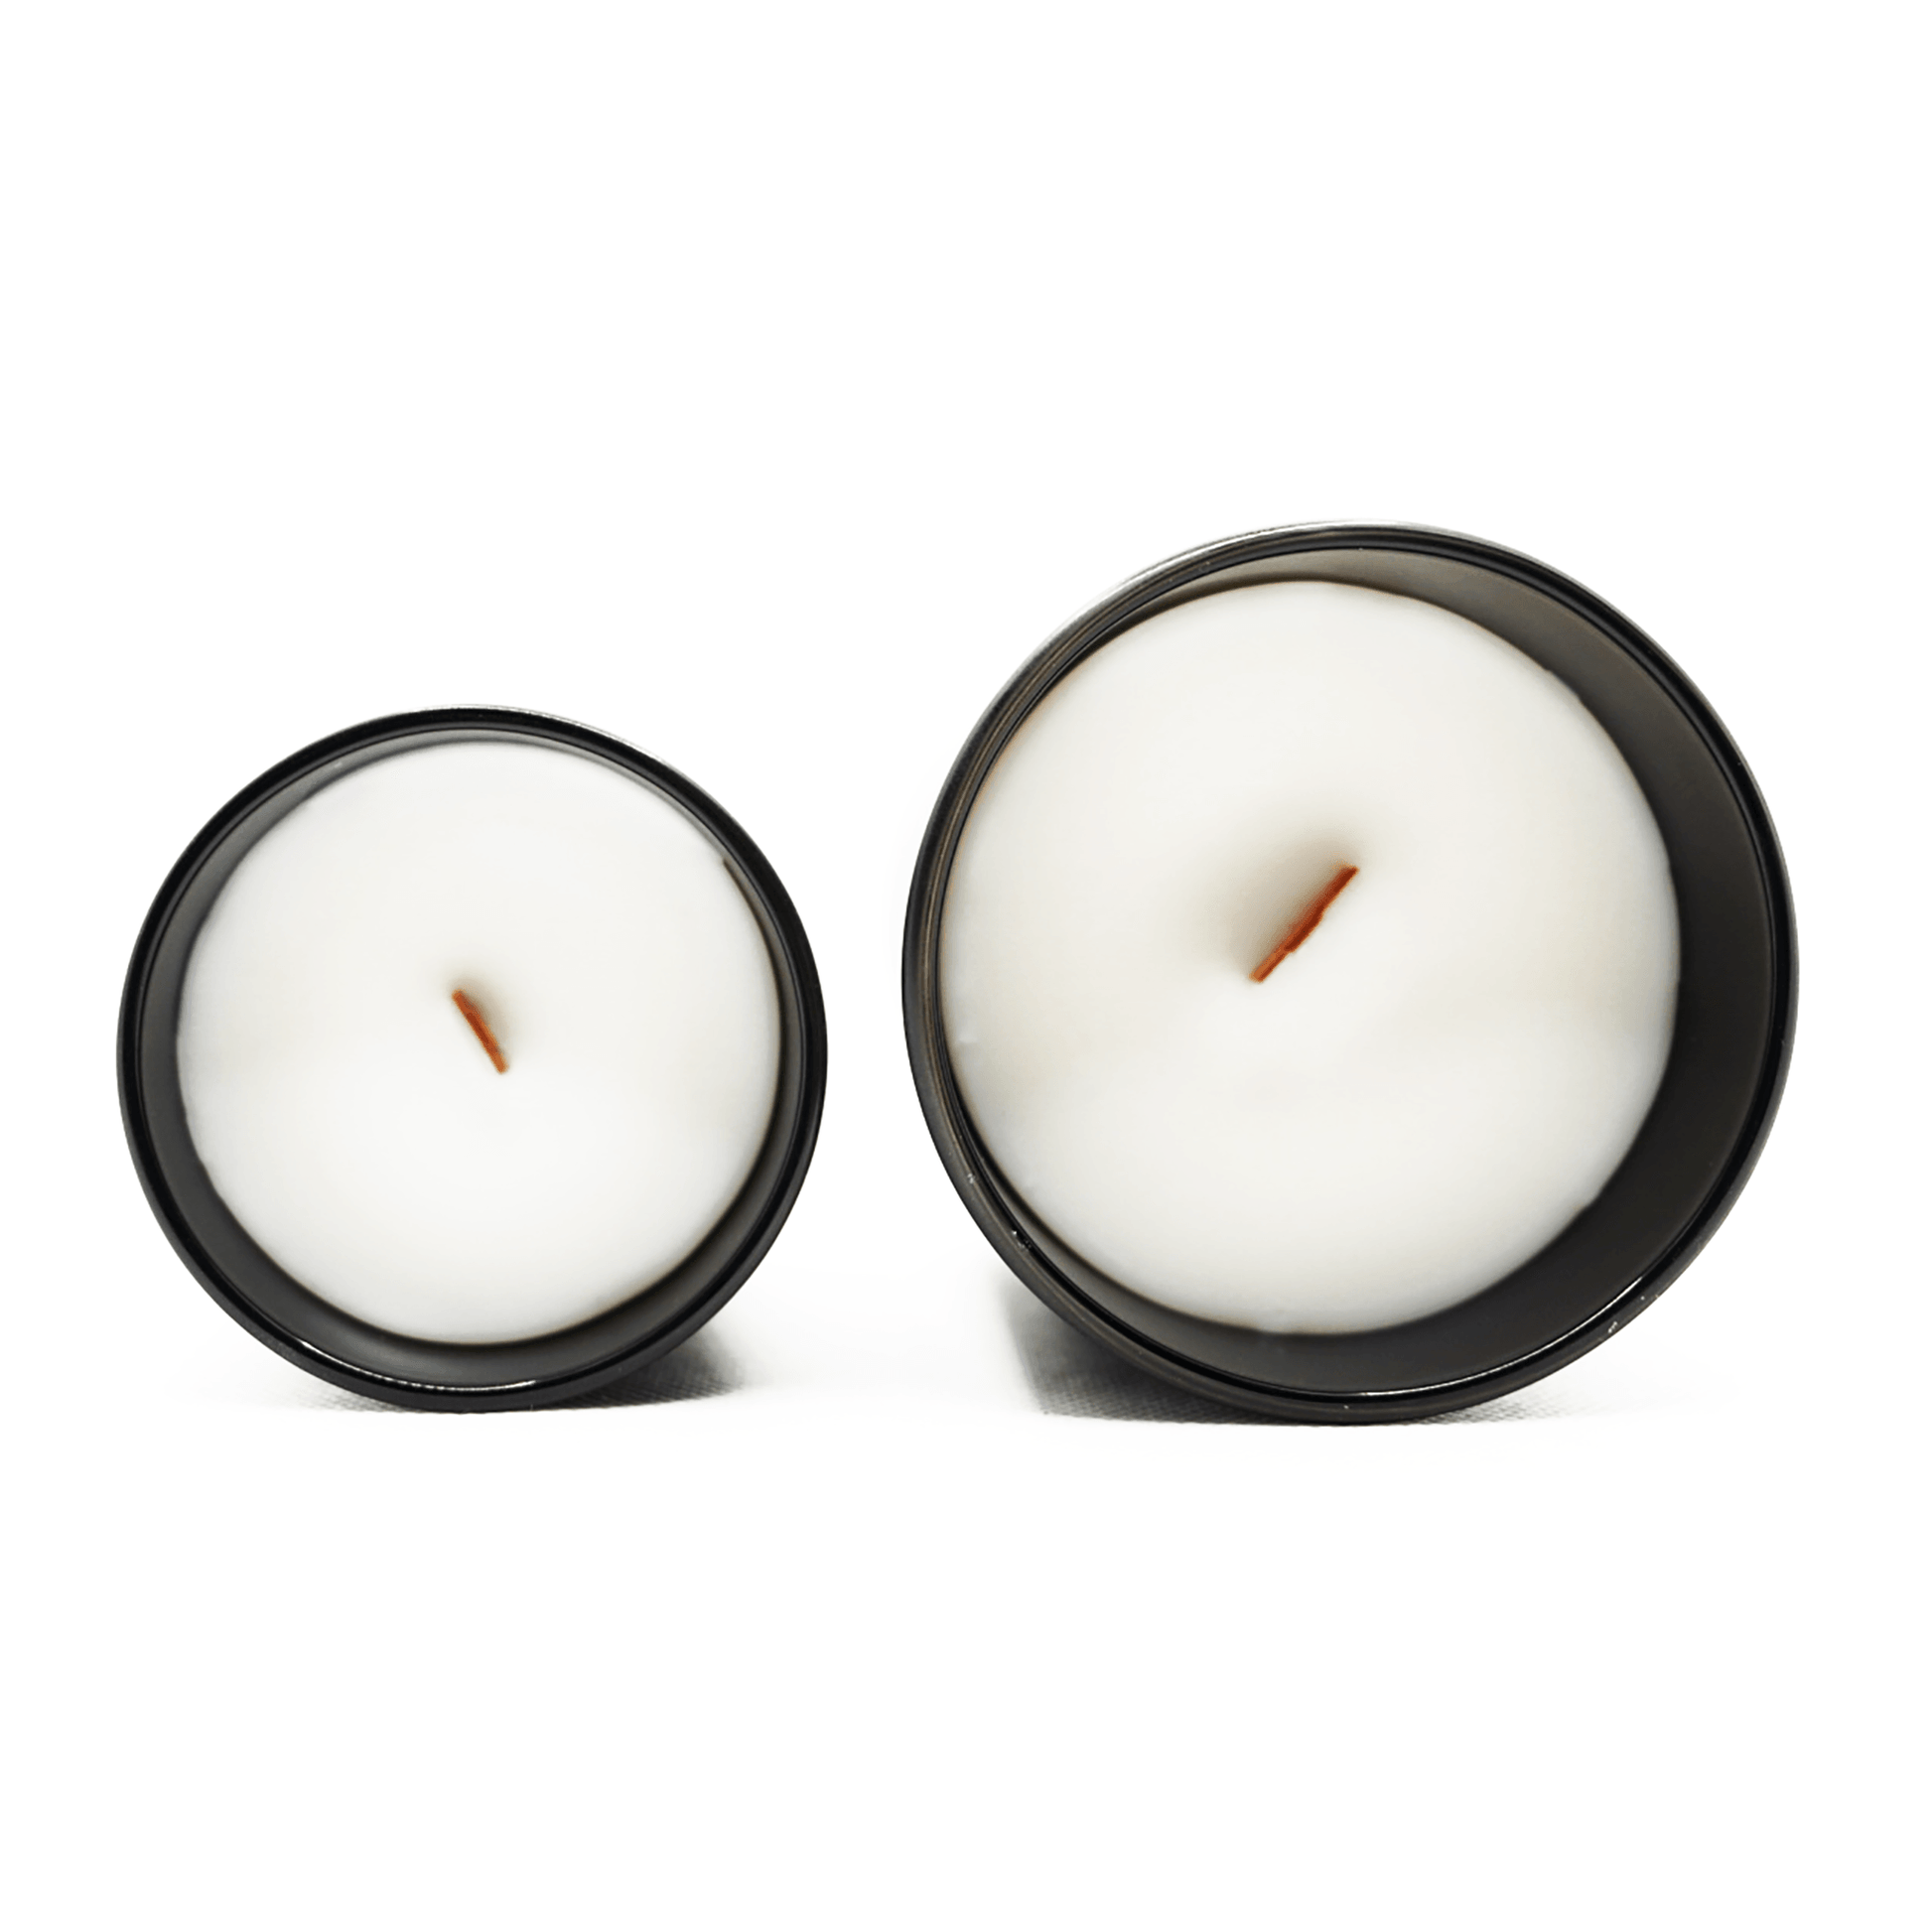 Passion Fruit + Guava + Teak | Woodwick Candle - BADWAX